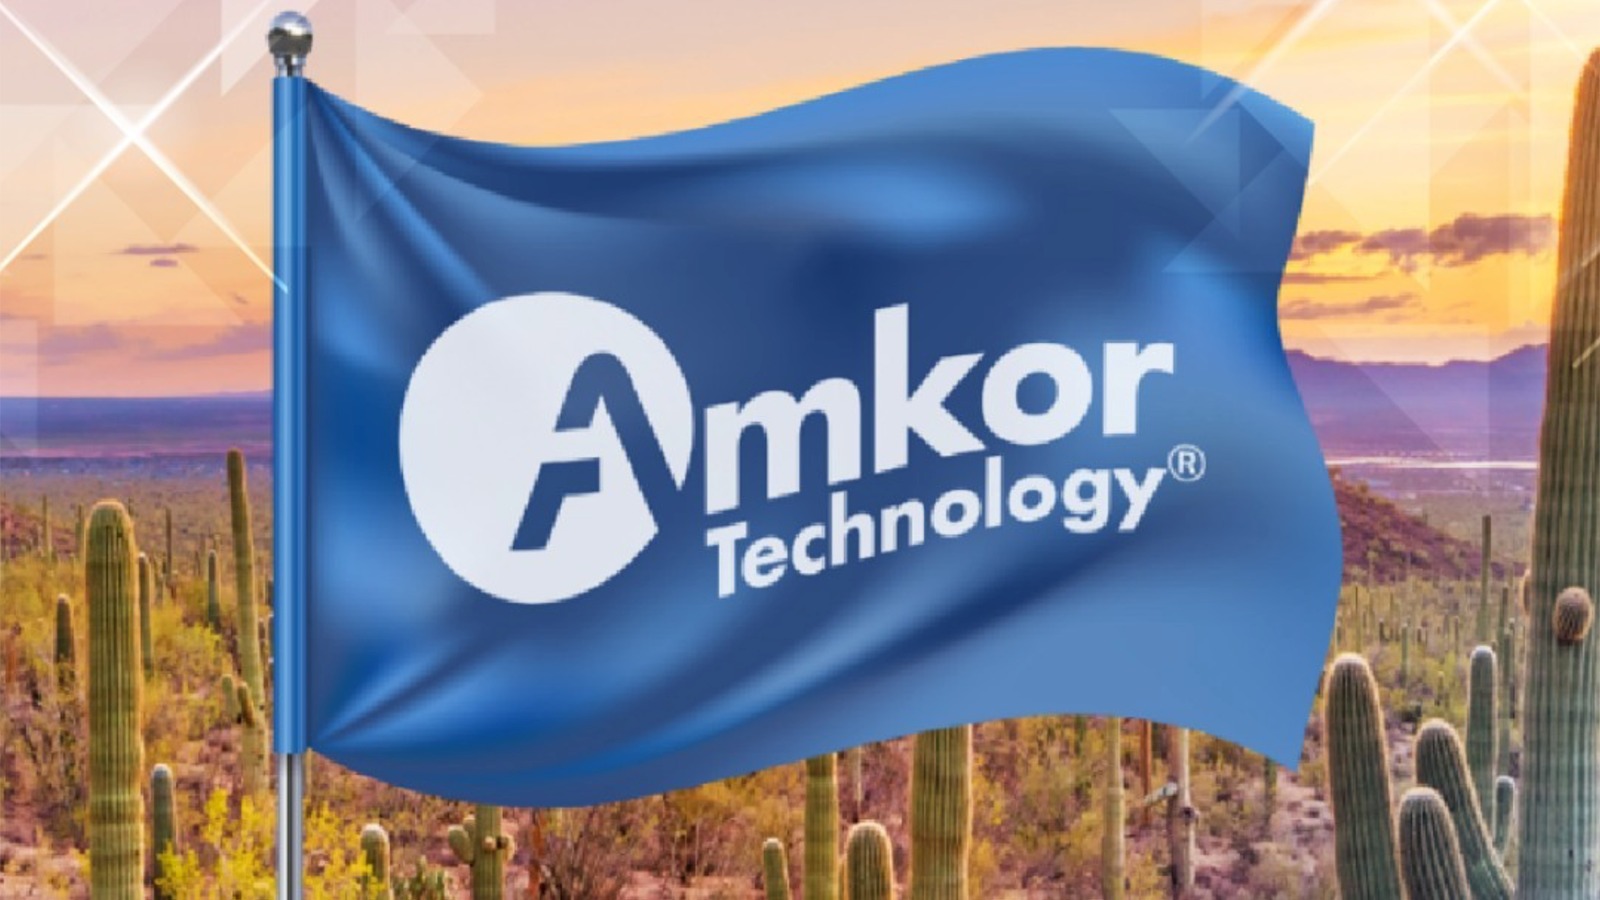 Apple to become first customer for Amkor's $2 billion Arizona chip packaging facility